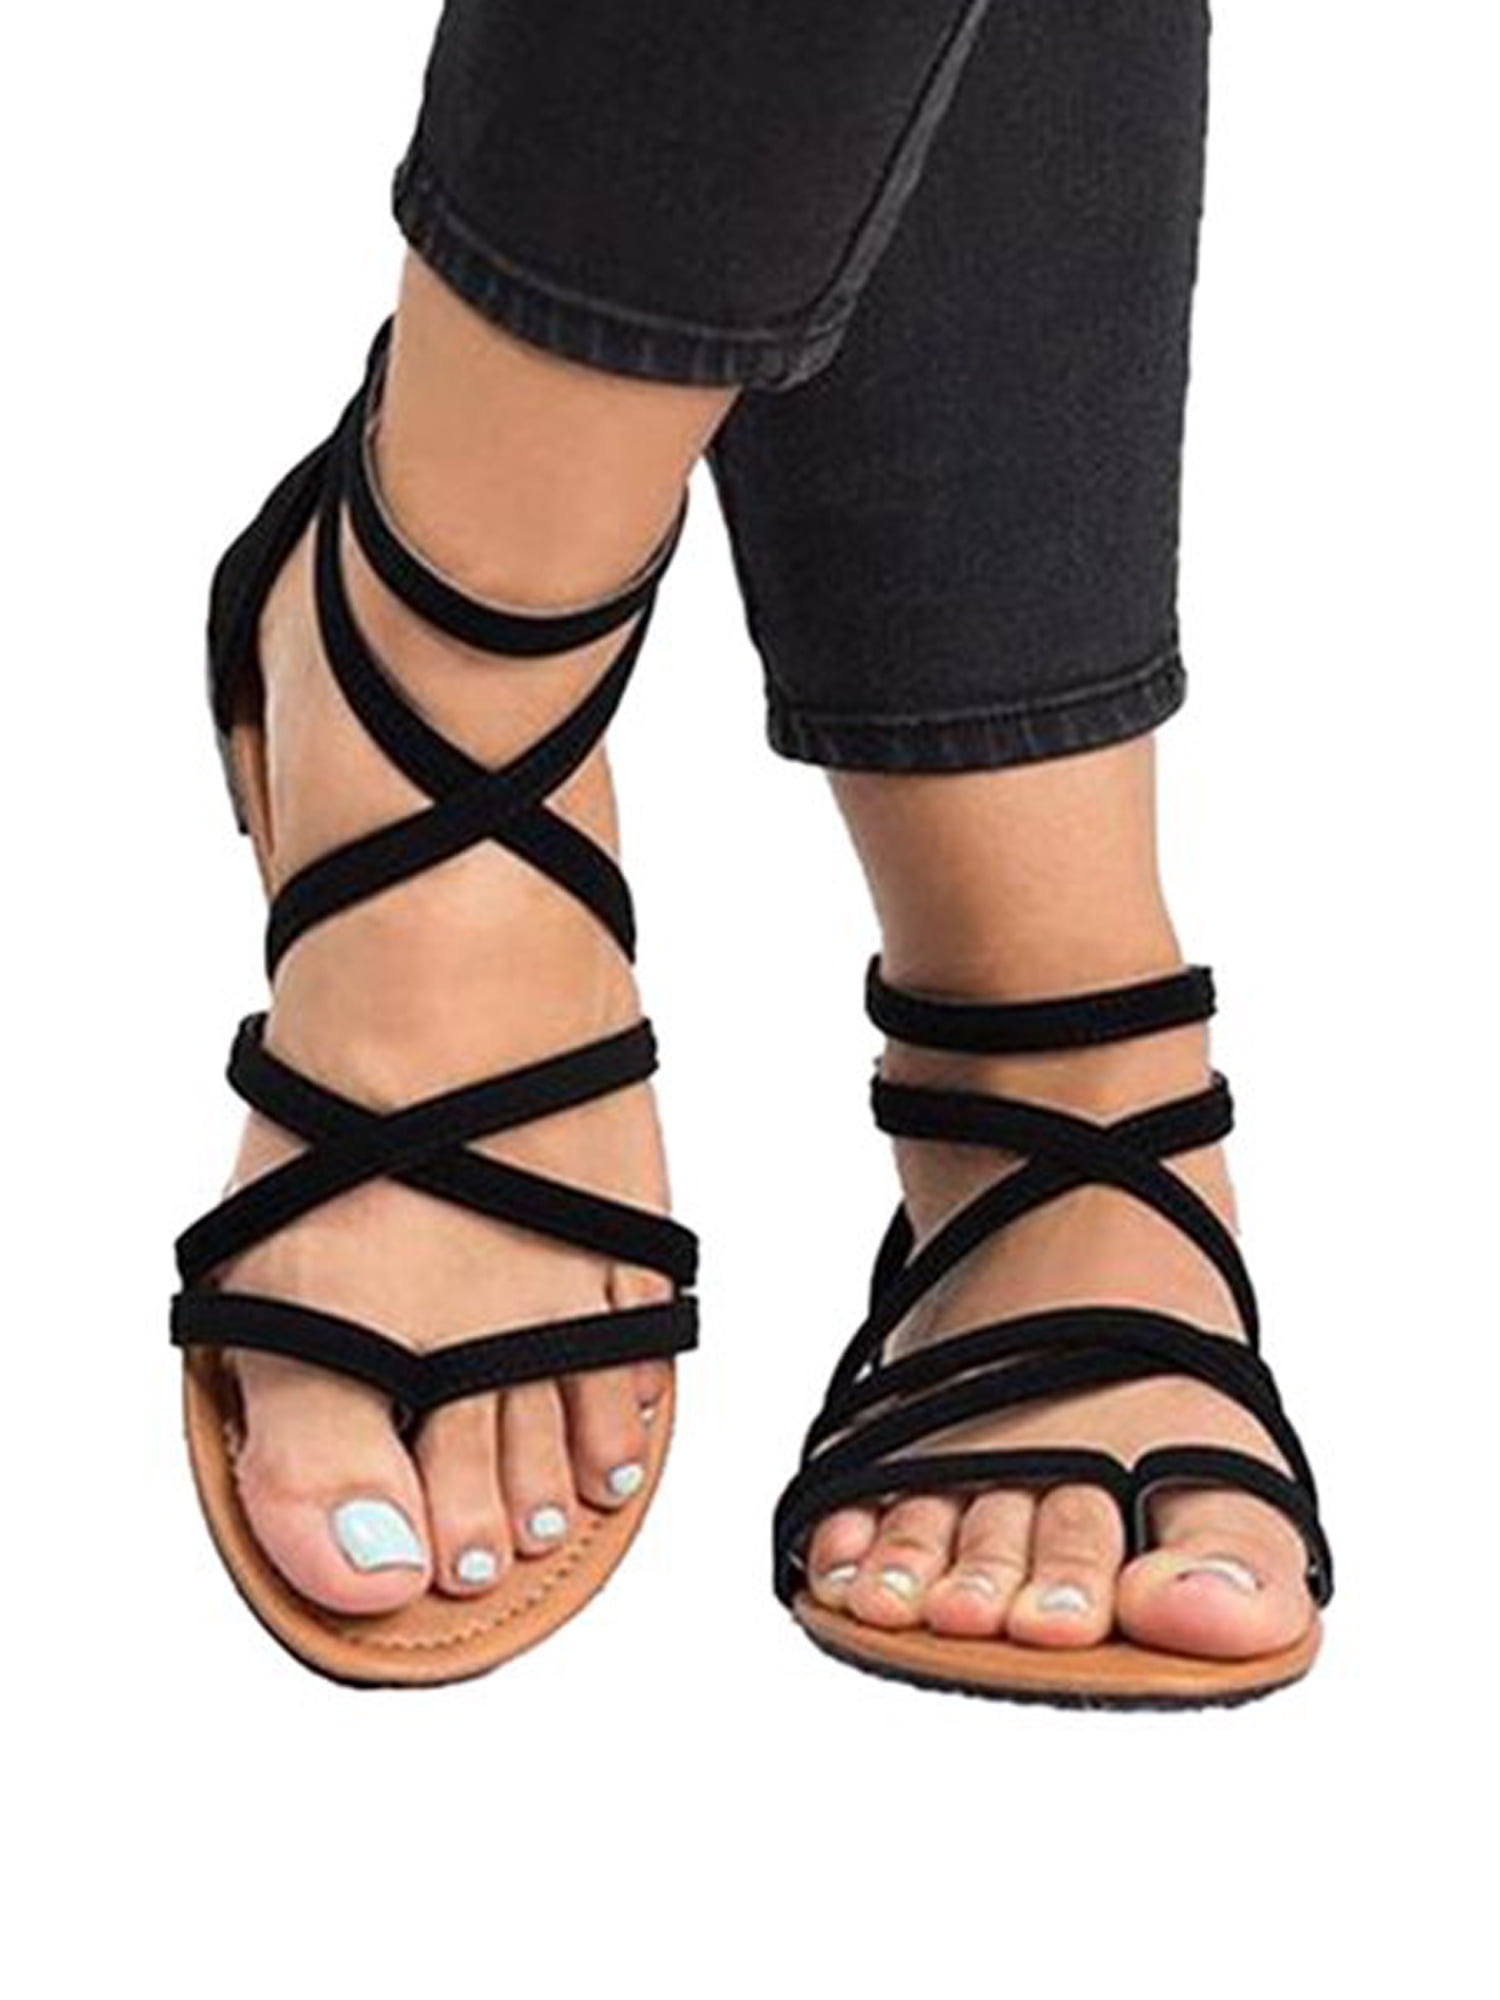 Womens Flat Strappy Sandals Ladies Summer Gladiator Party Lace Up Shoes Size 3-6 